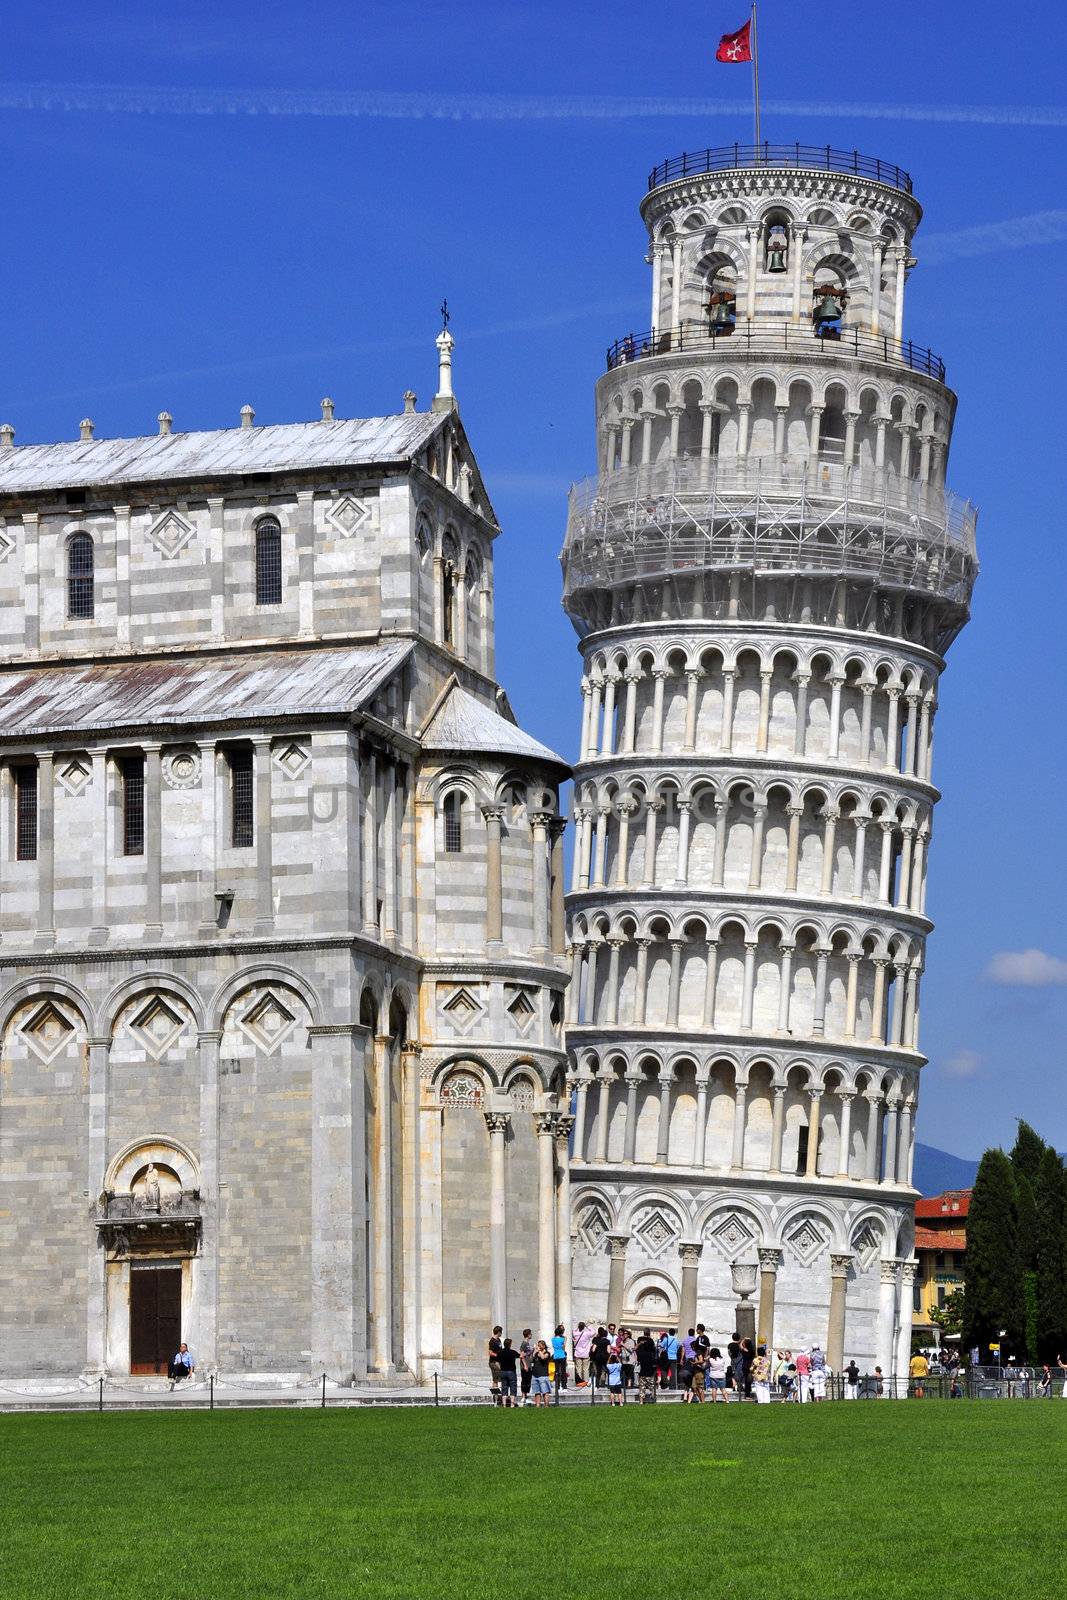 Leaning Tower of Pisa , in Italy